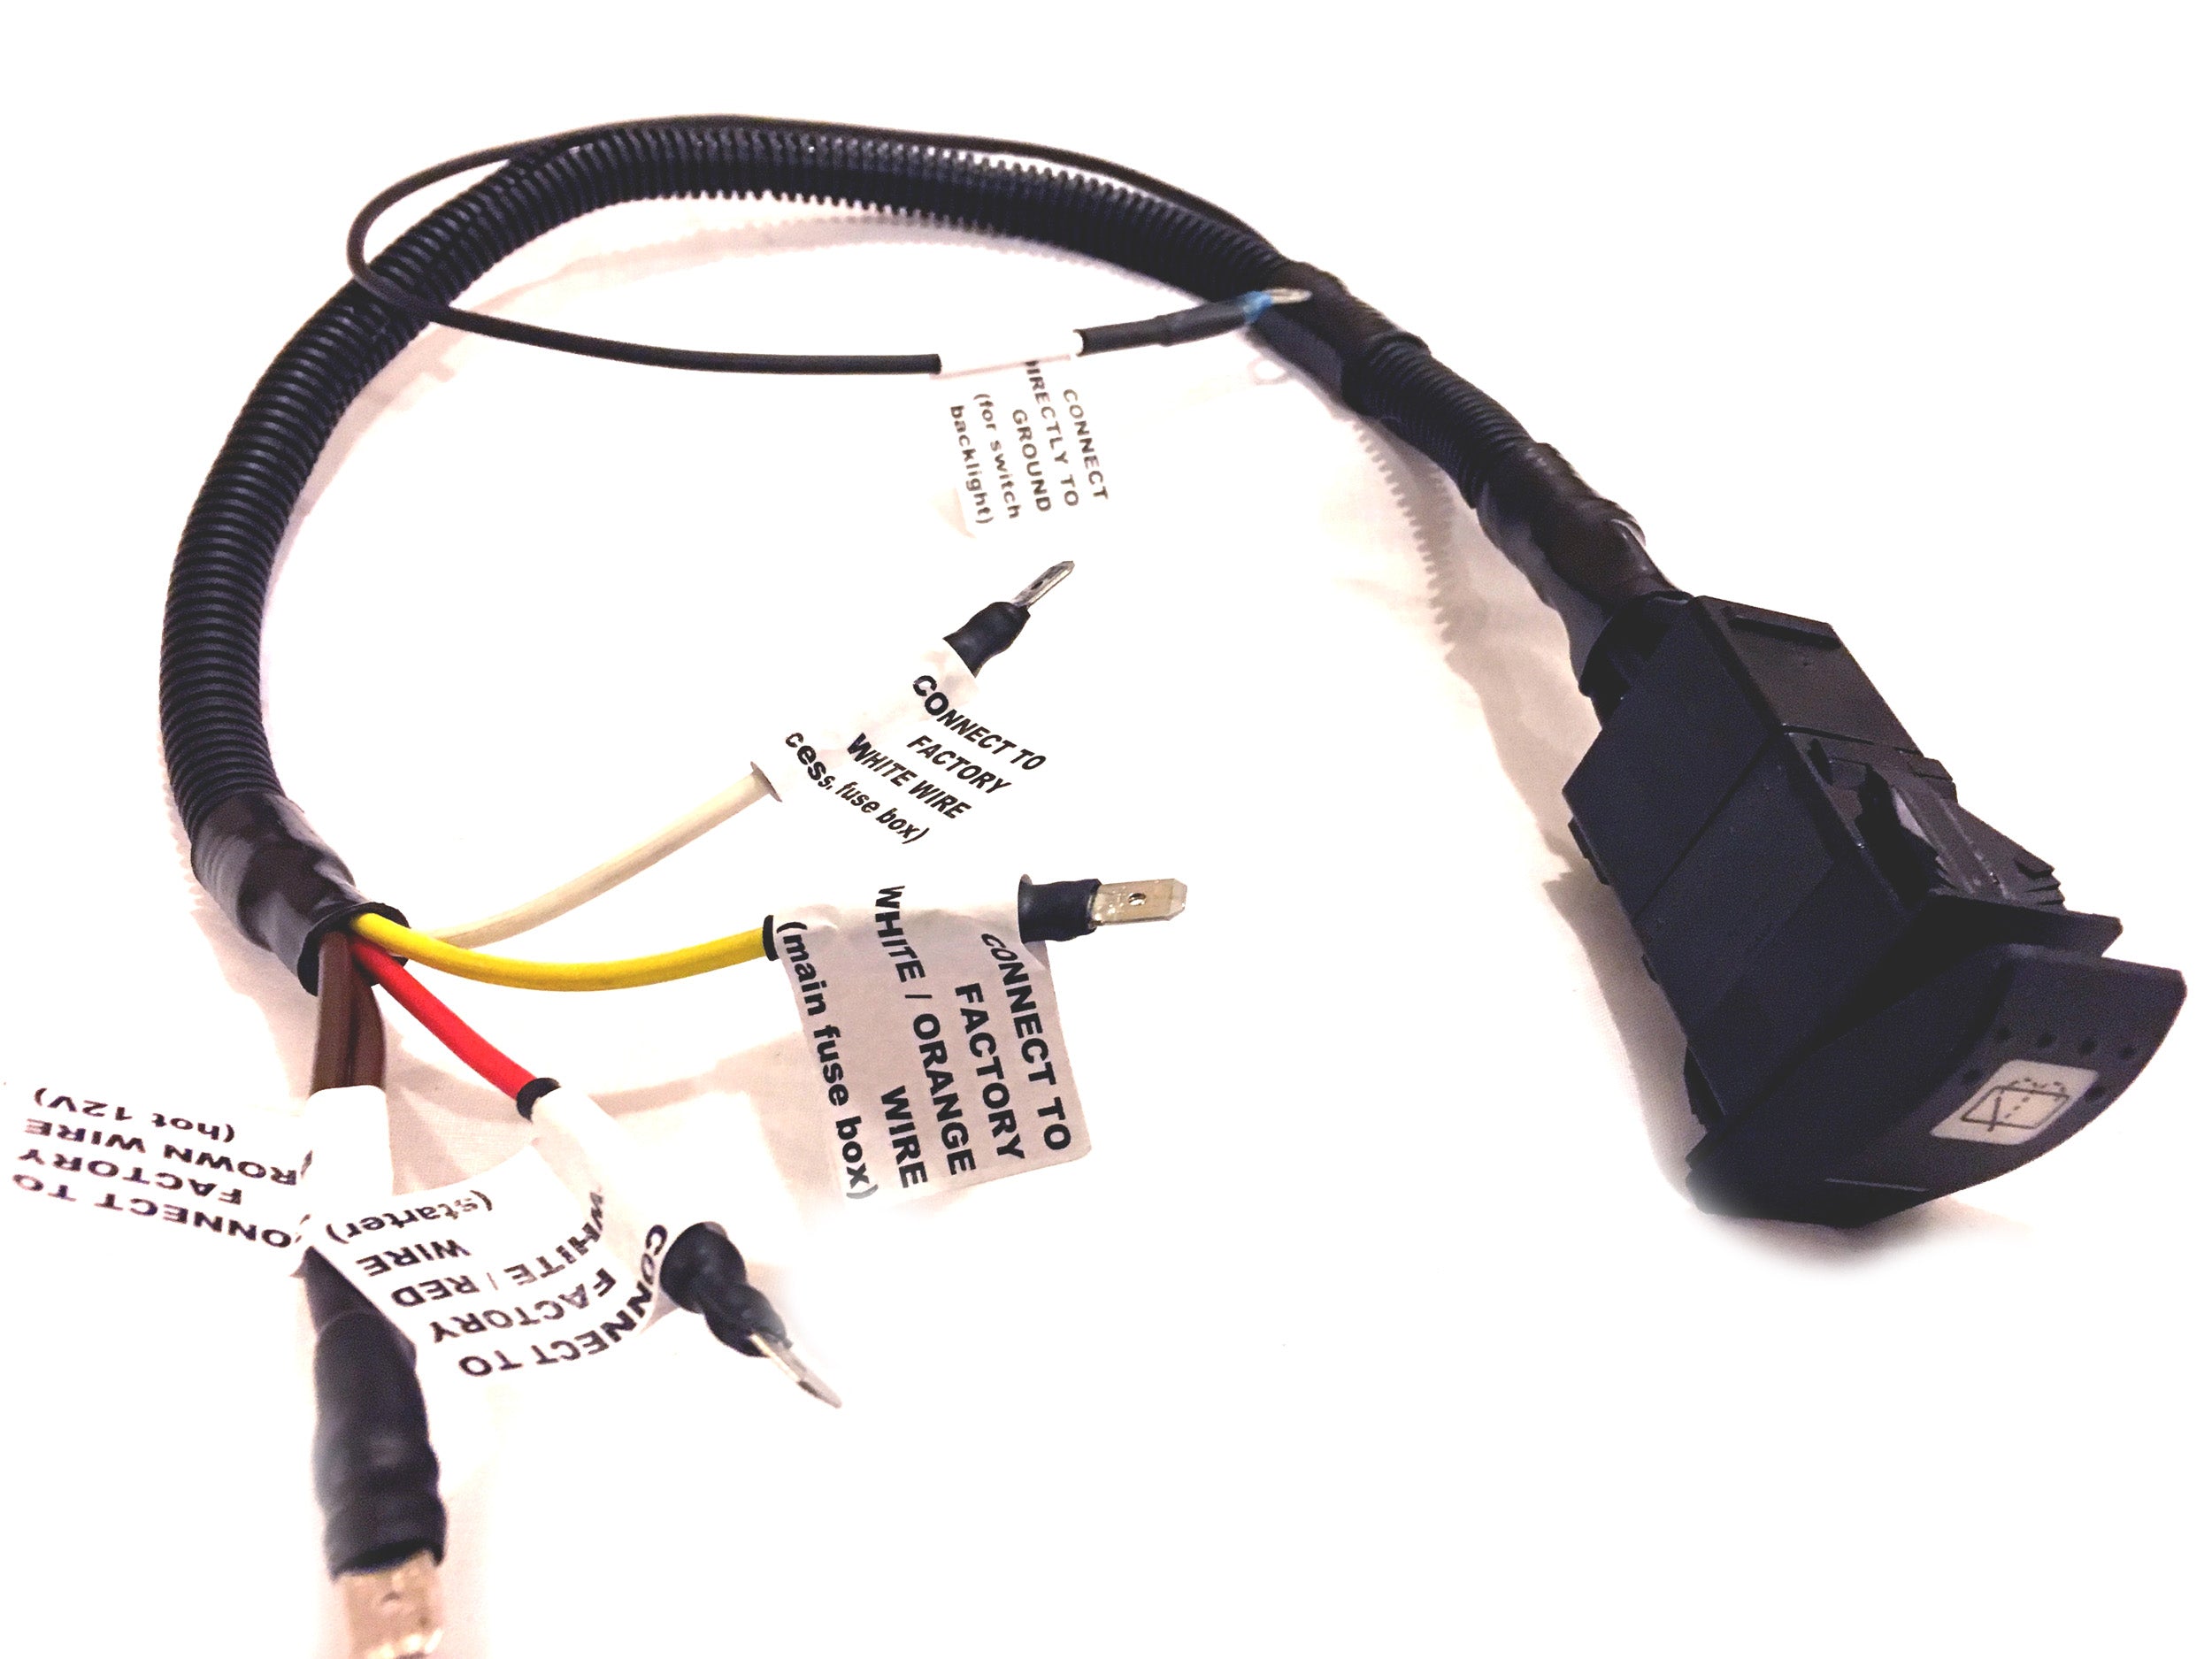 Defender Ignition Switch Wiring Harness (bypass) (*includes* Carling Switch & Multiplug) - for Land Rover 90/110/130